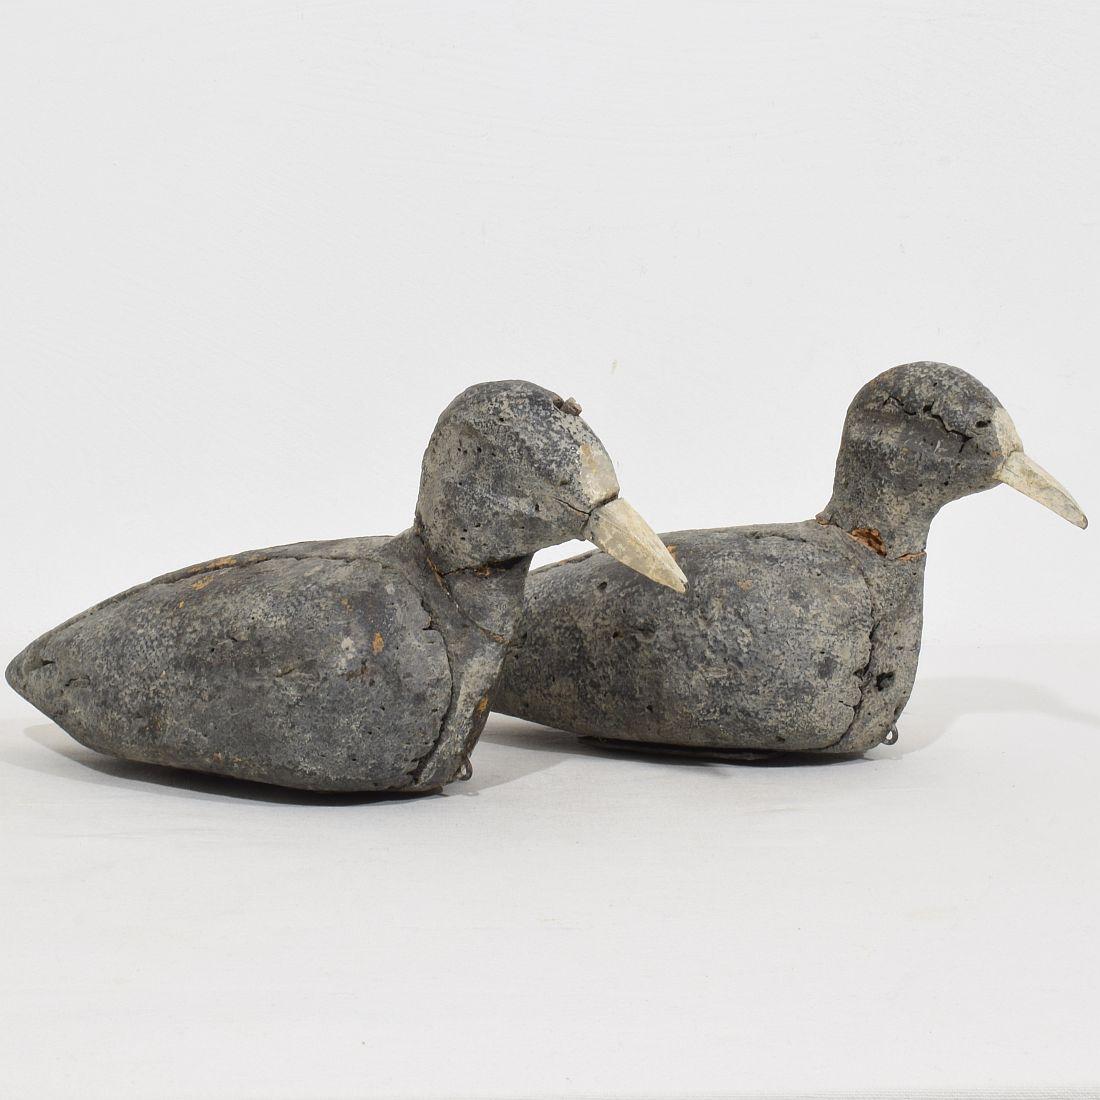 Lovely pair of French folk art decoys. Two Coots made out of cork and with wooden beaks.
On the bottom you can see lead weights to keep them on place on the water.
Very decorative and rare pieces especially as a pair.
France circa 1880. weathered,